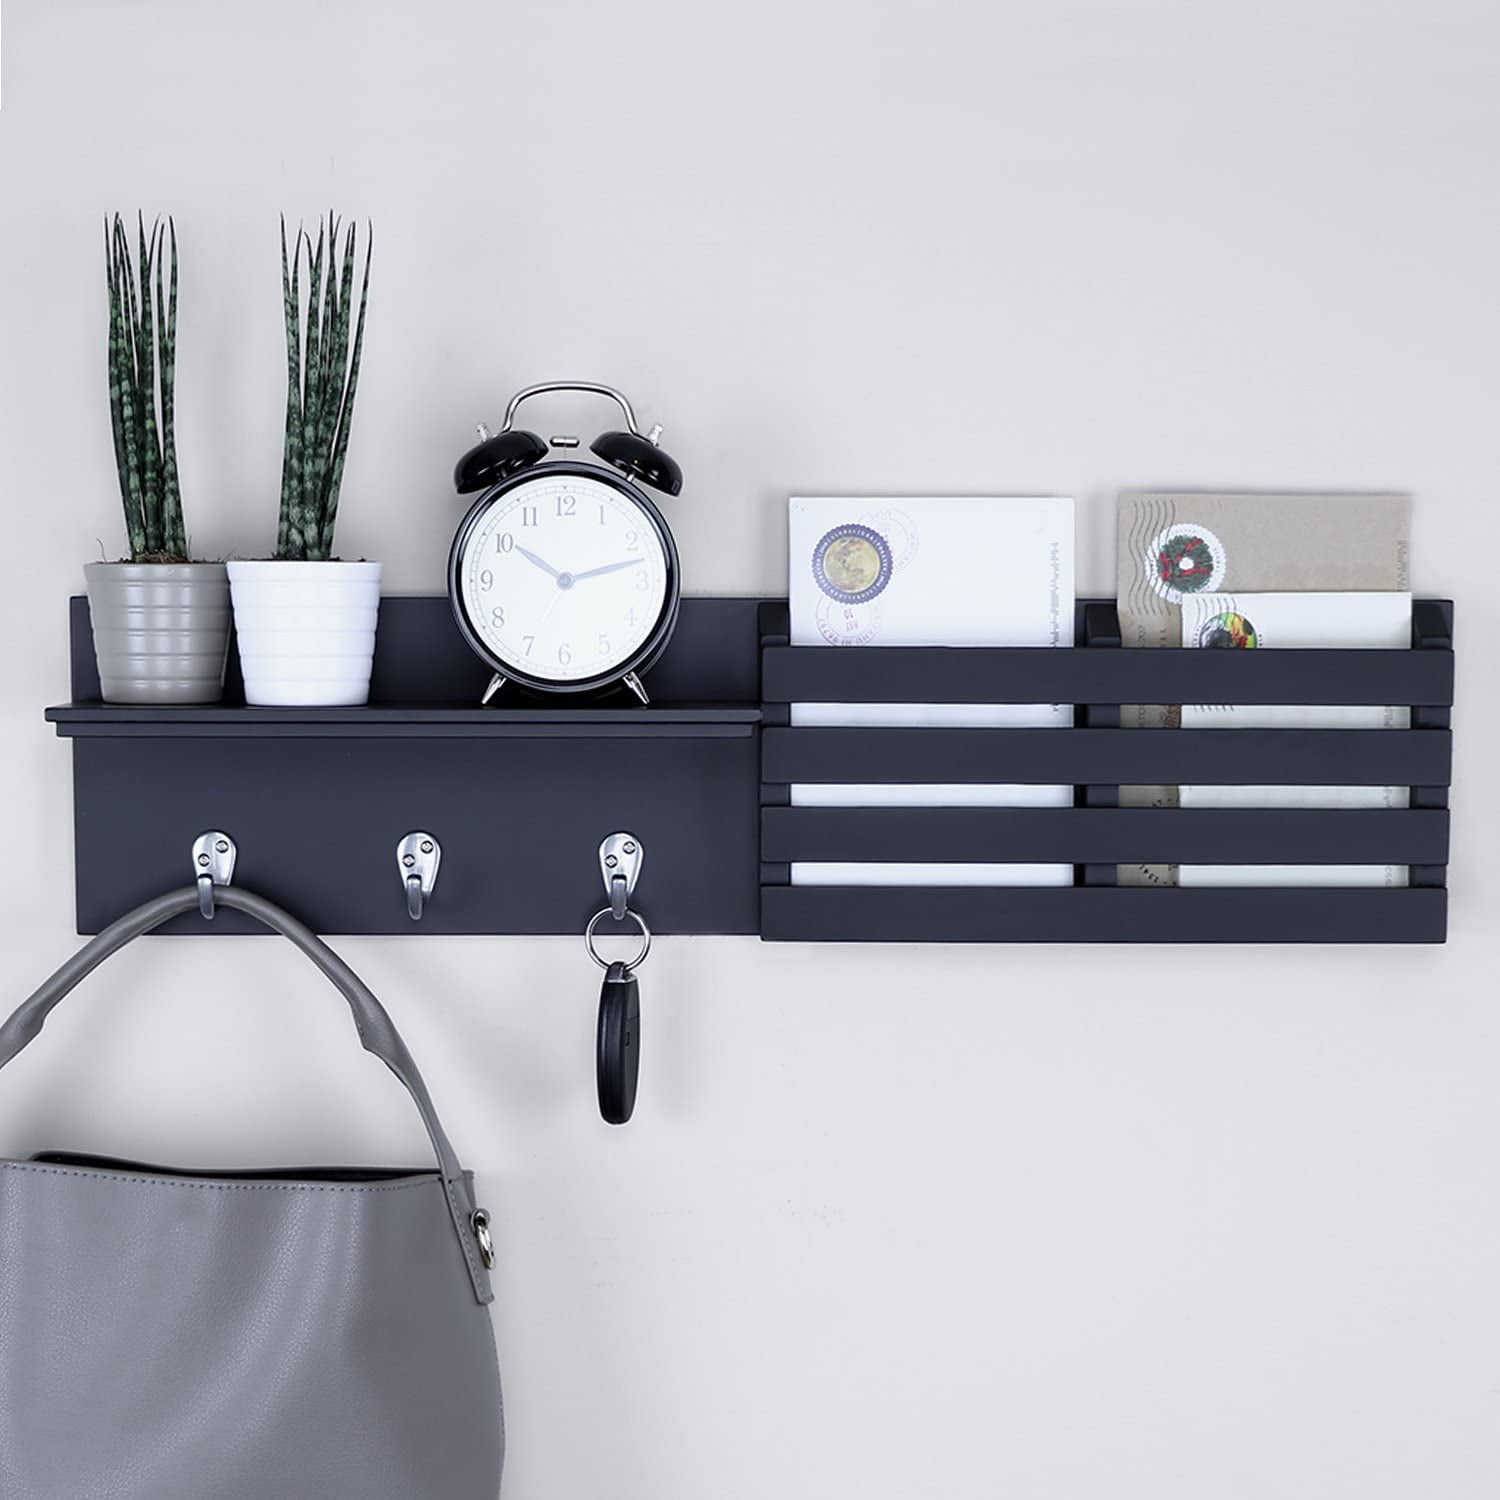 Details about   Wall Mount & Mail Key Rack Black 